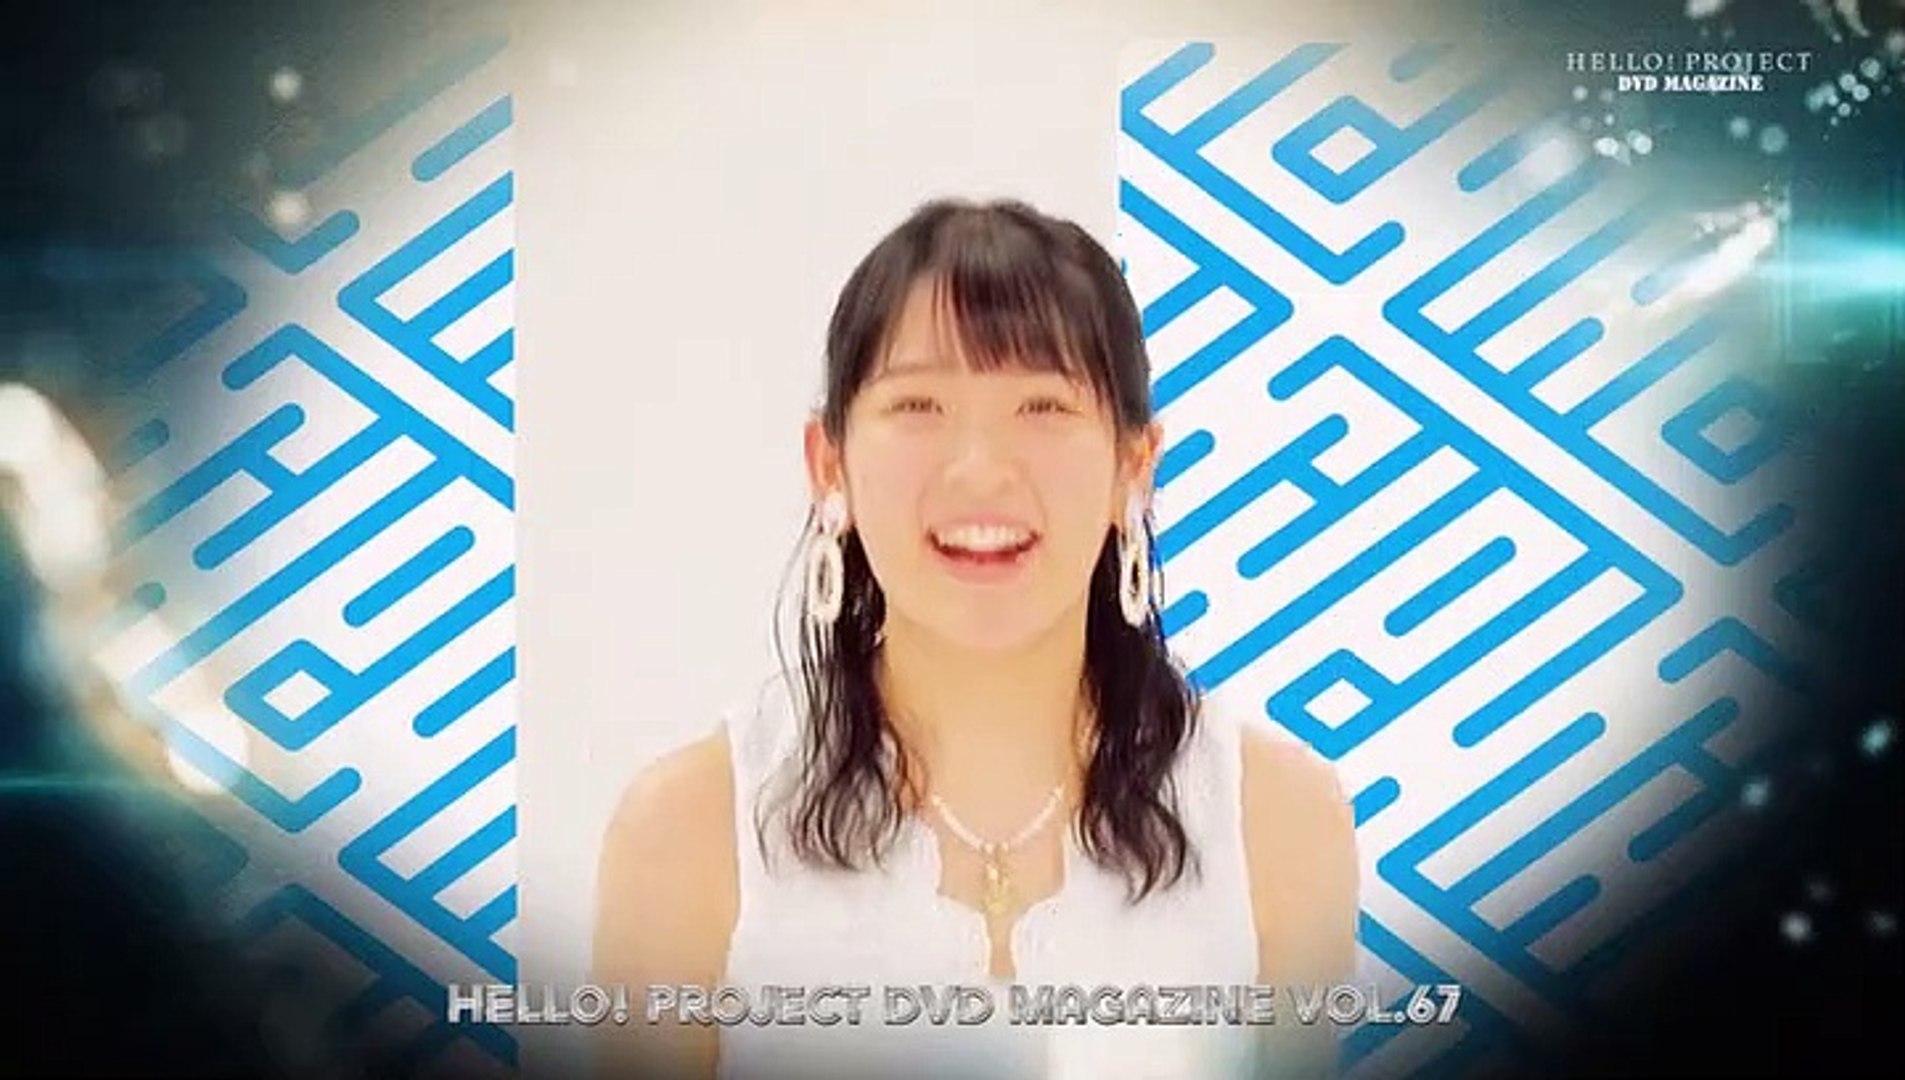 Hello! Project Dvd Magazine Vol.67 Disc 1 Part 2 - video Dailymotion